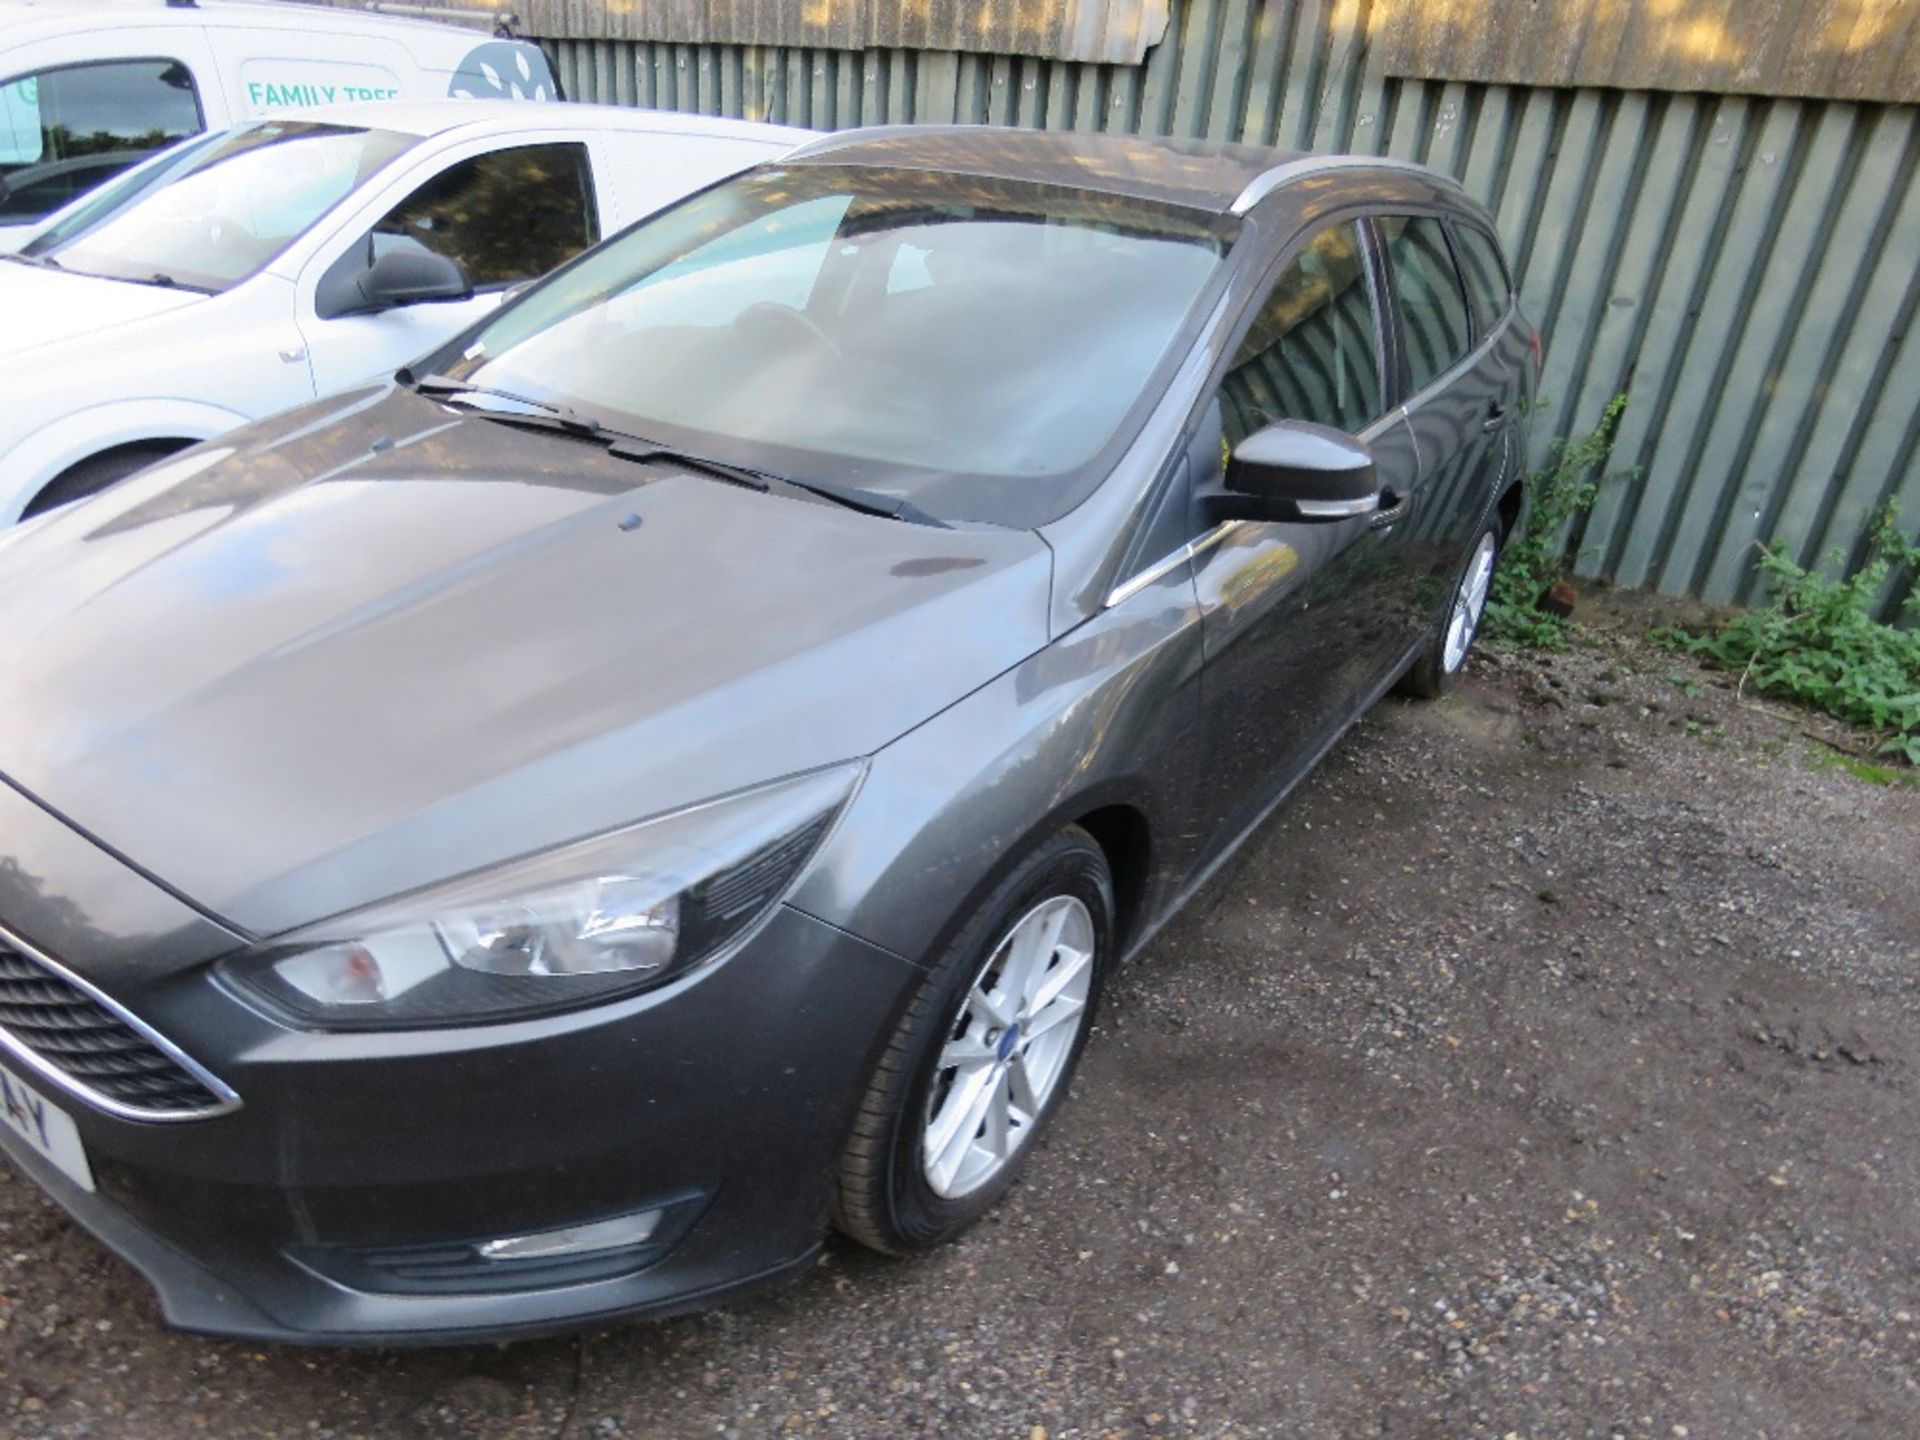 FORD FOCUS ESTATE CAR REG:MK15 XAY. SOLD AS NON RUNNER/ ENGINE REQUIRING ATTENTION. WITH V5 - Image 3 of 11